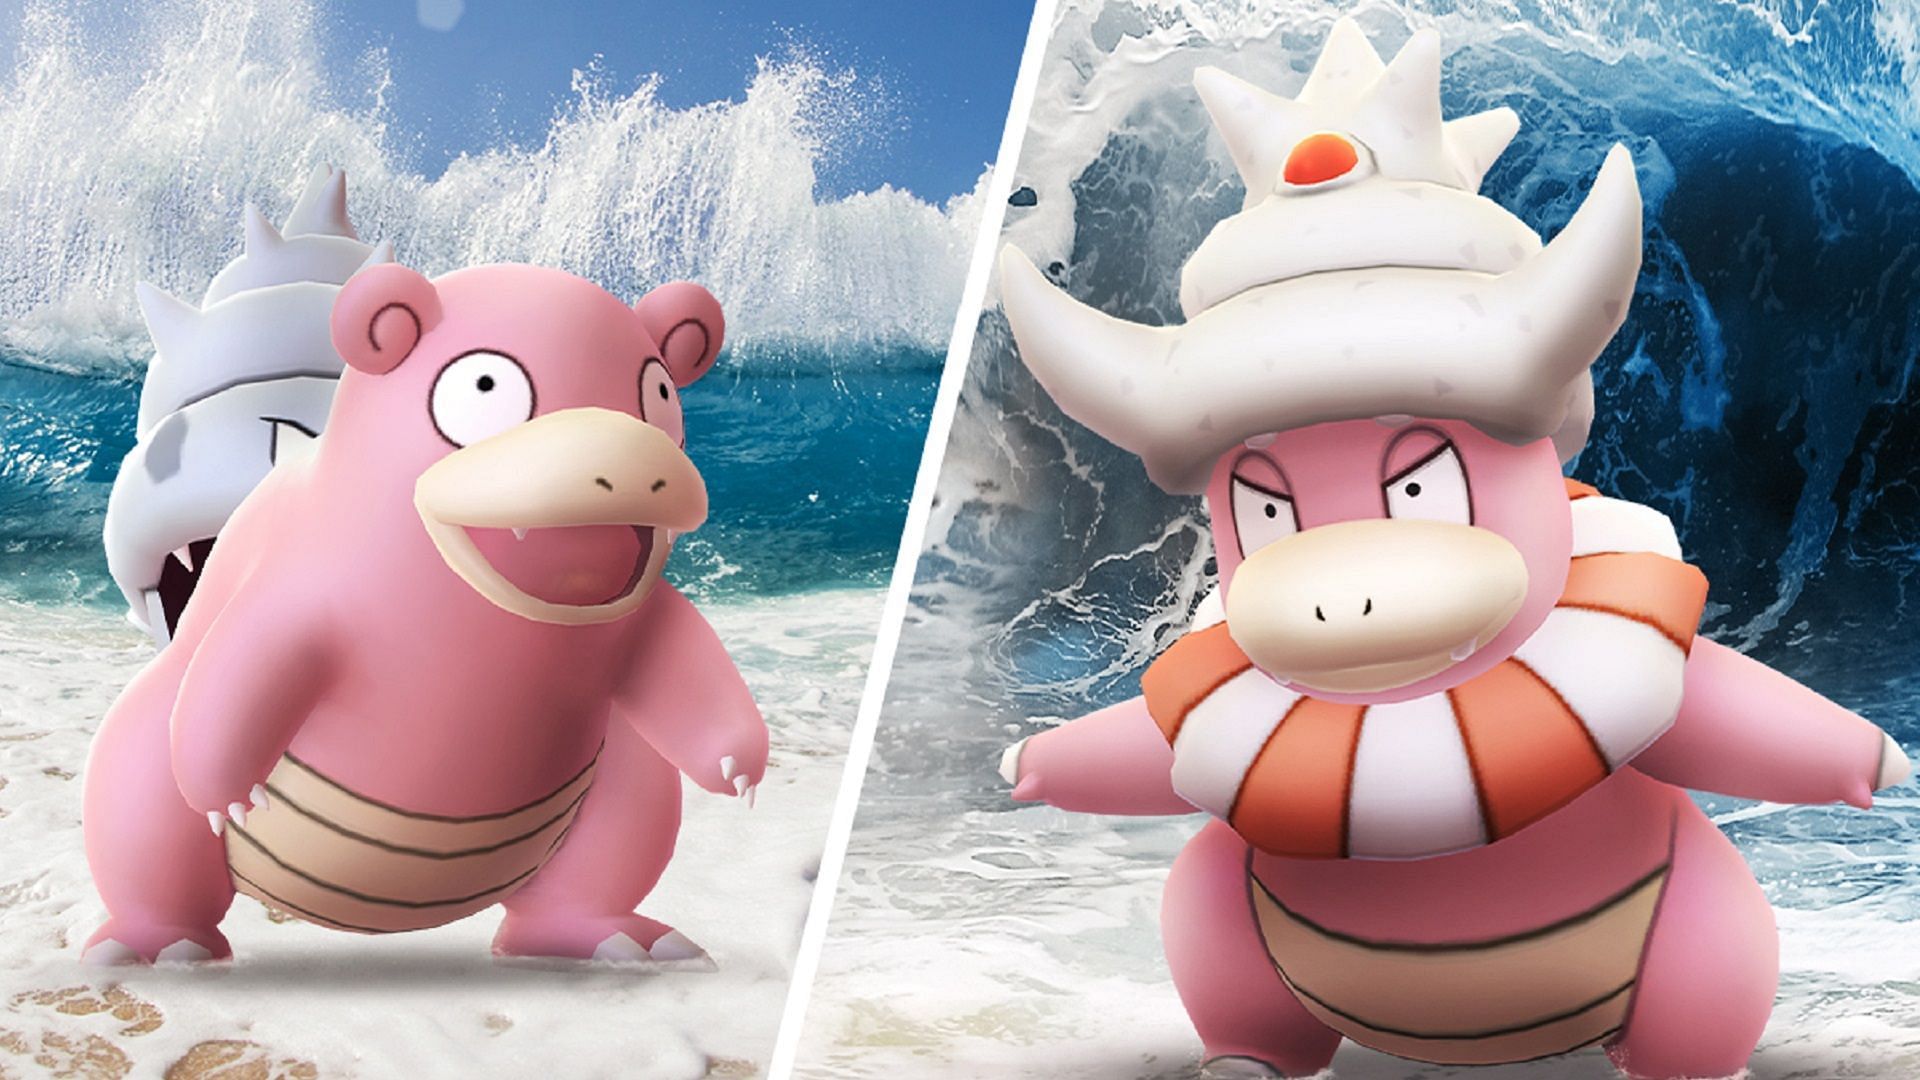 Slowbro and Slowking have some variance in their best PvE movesets in Pokemon GO (Image via Niantic)